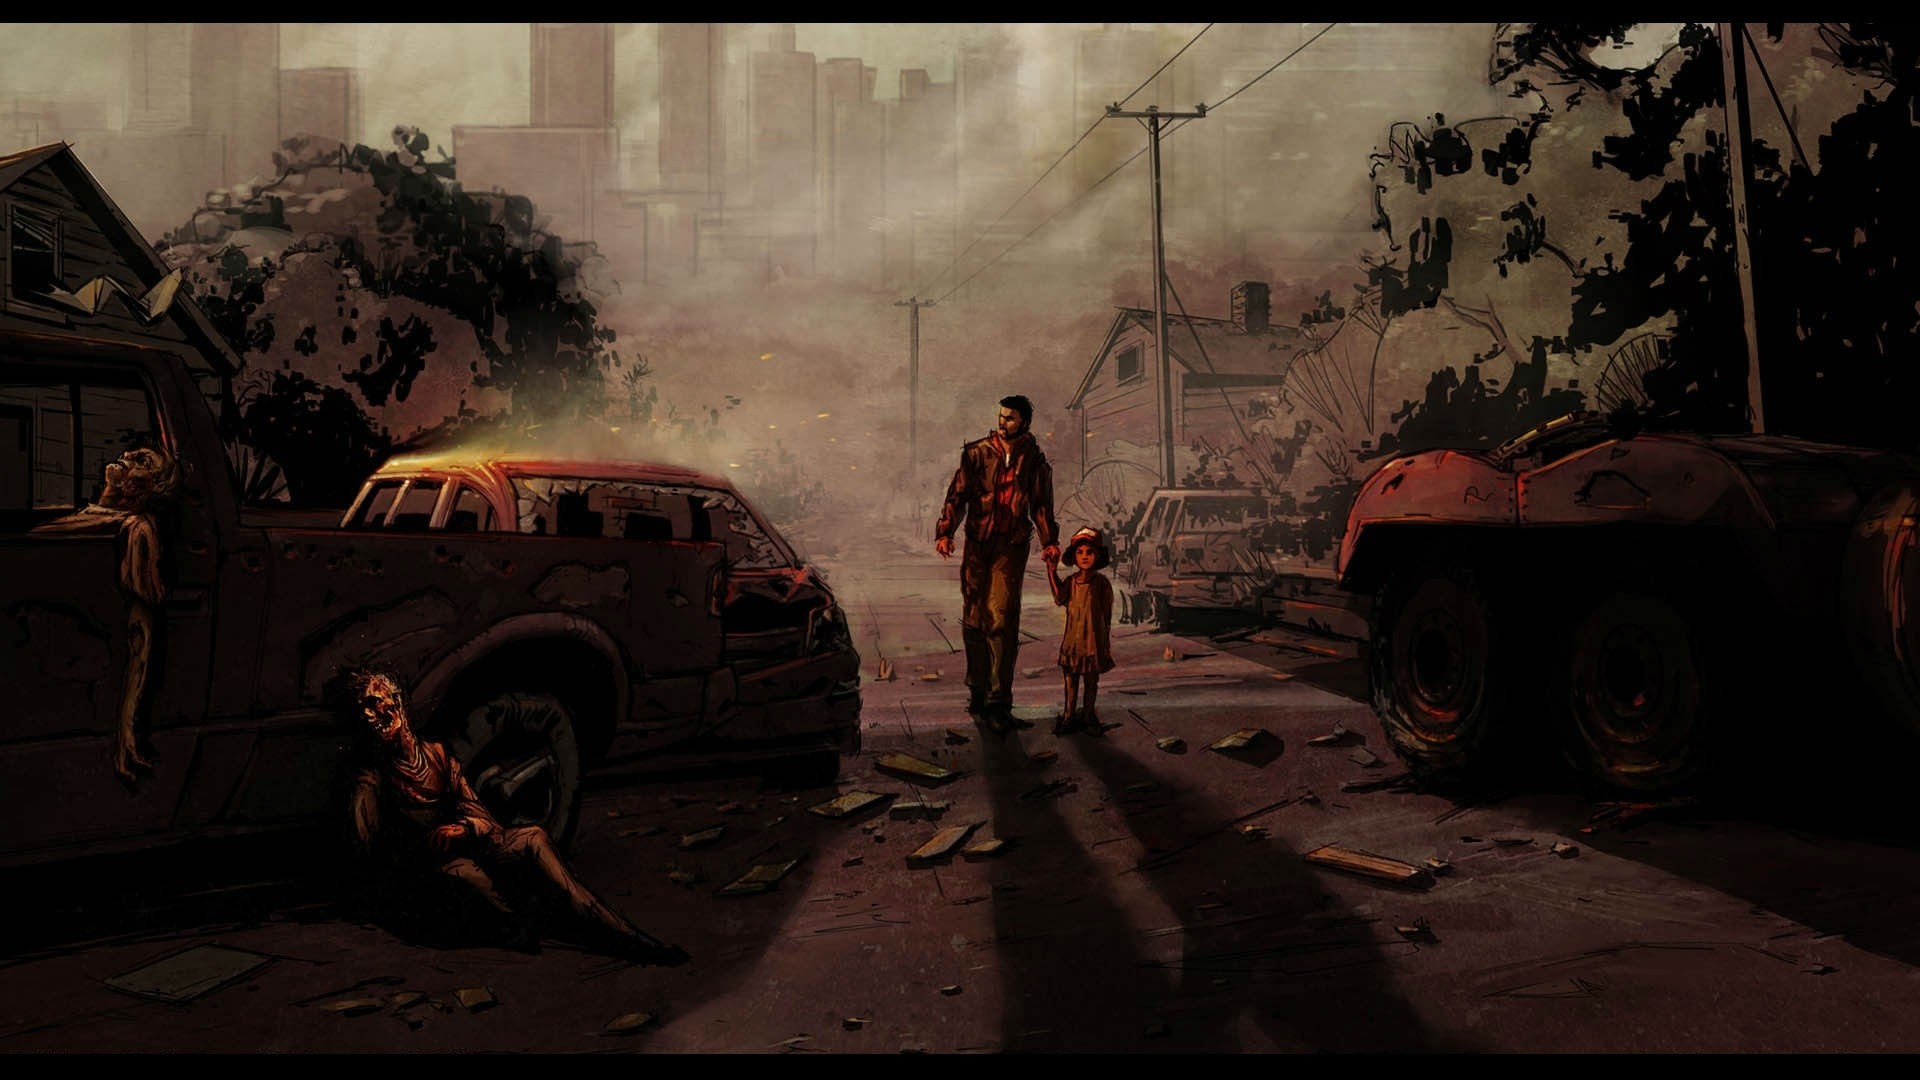 1920x1080 Title : 17 the walking dead: season 1 hd wallpapers | background images.  Dimension : 1920 x 1080. File Type : JPG/JPEG